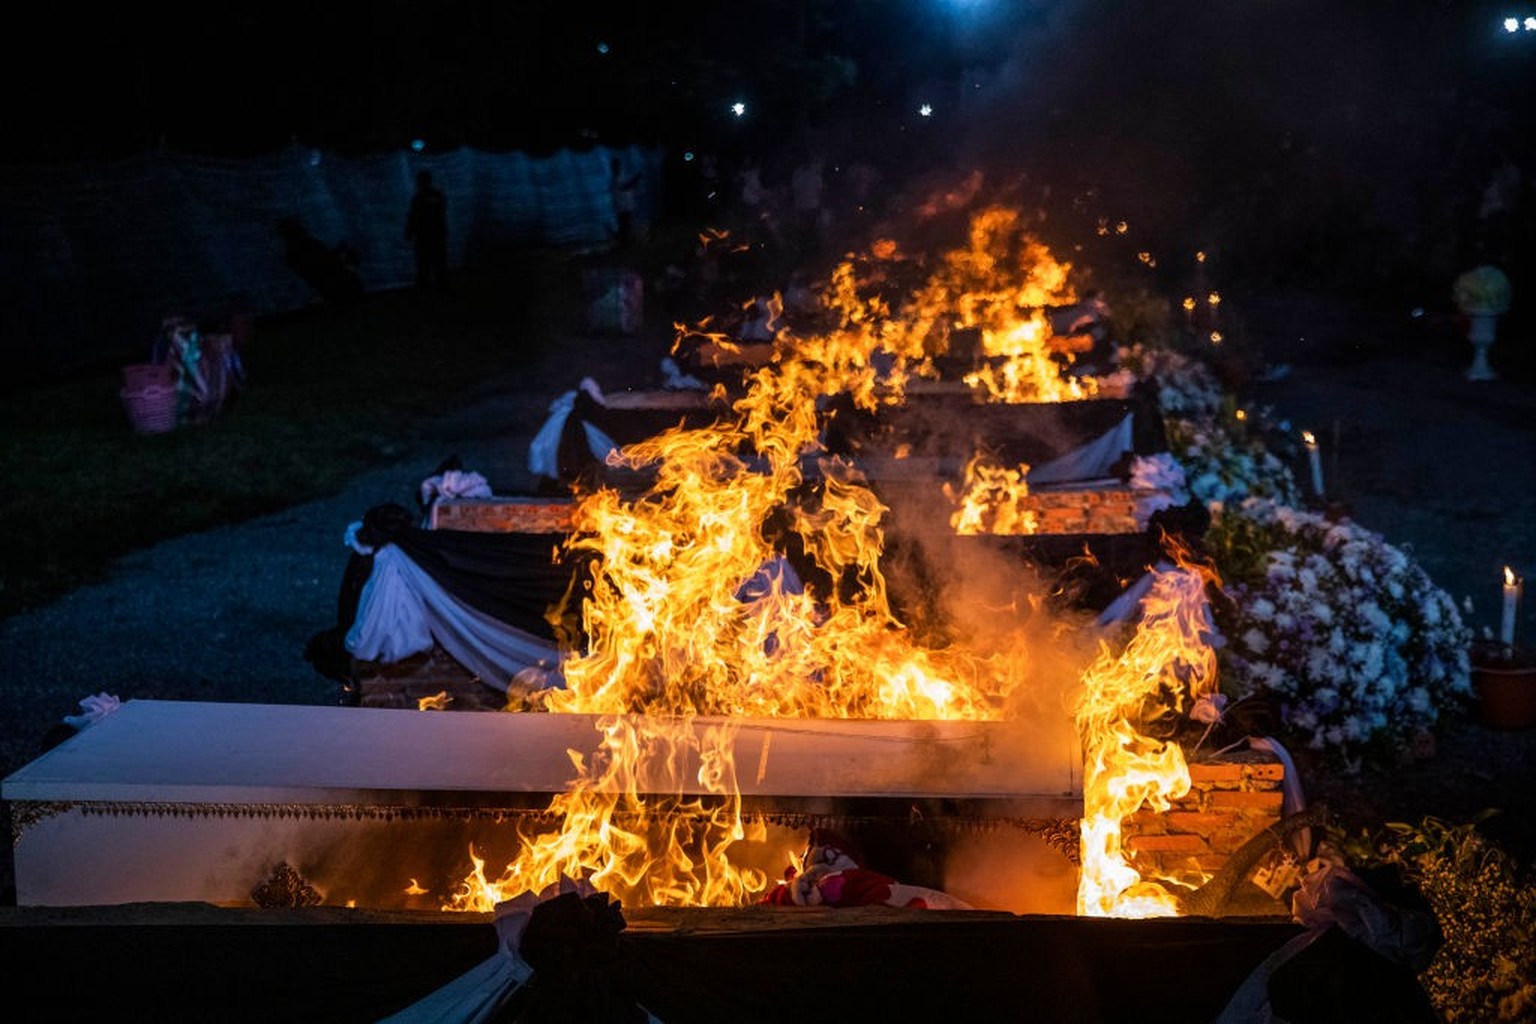 NONG BUA LAMPHU, THAILAND - OCTOBER 11: Victims of the massacre in Nong Bua Lamphu are cremated at Wat Rat Samakee on October 11, 2022 in Uthai Sawan subdistrict, Nong Bua Lamphu, Thailand. Local medi ...